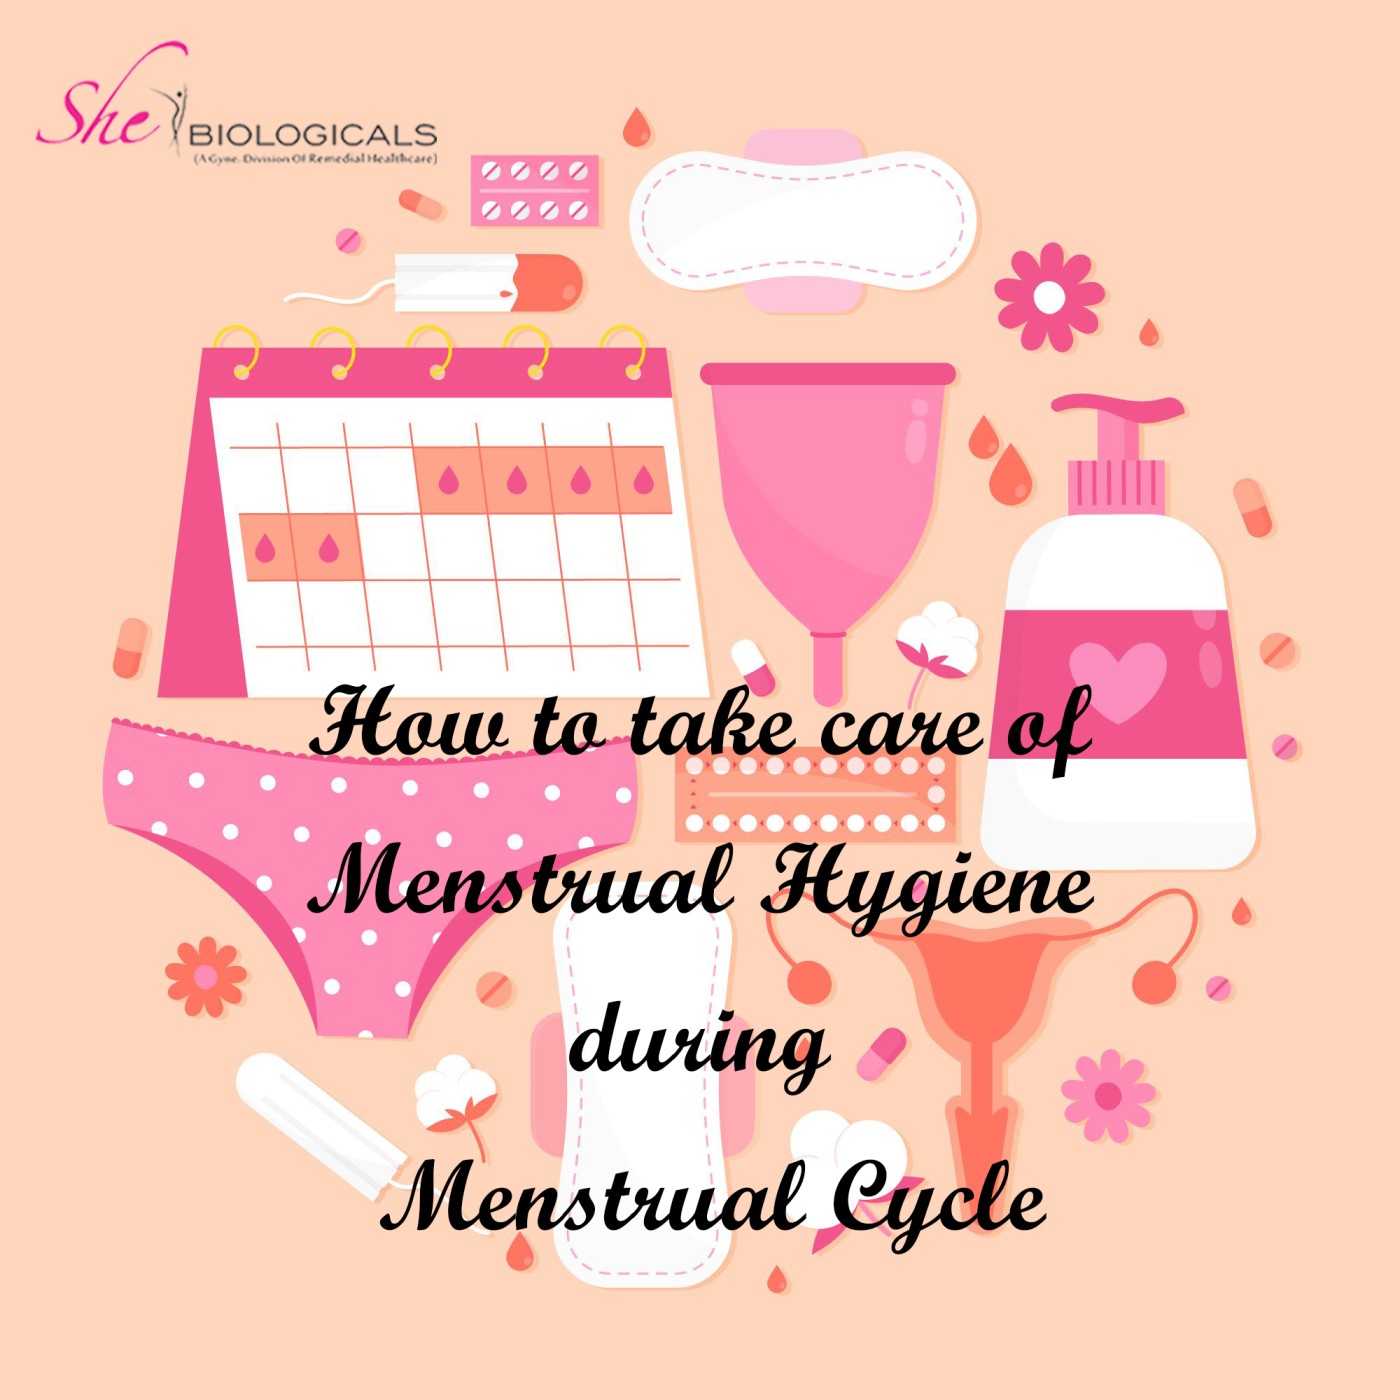 How to take care of Menstrual Hygiene during Menstrual Cycle